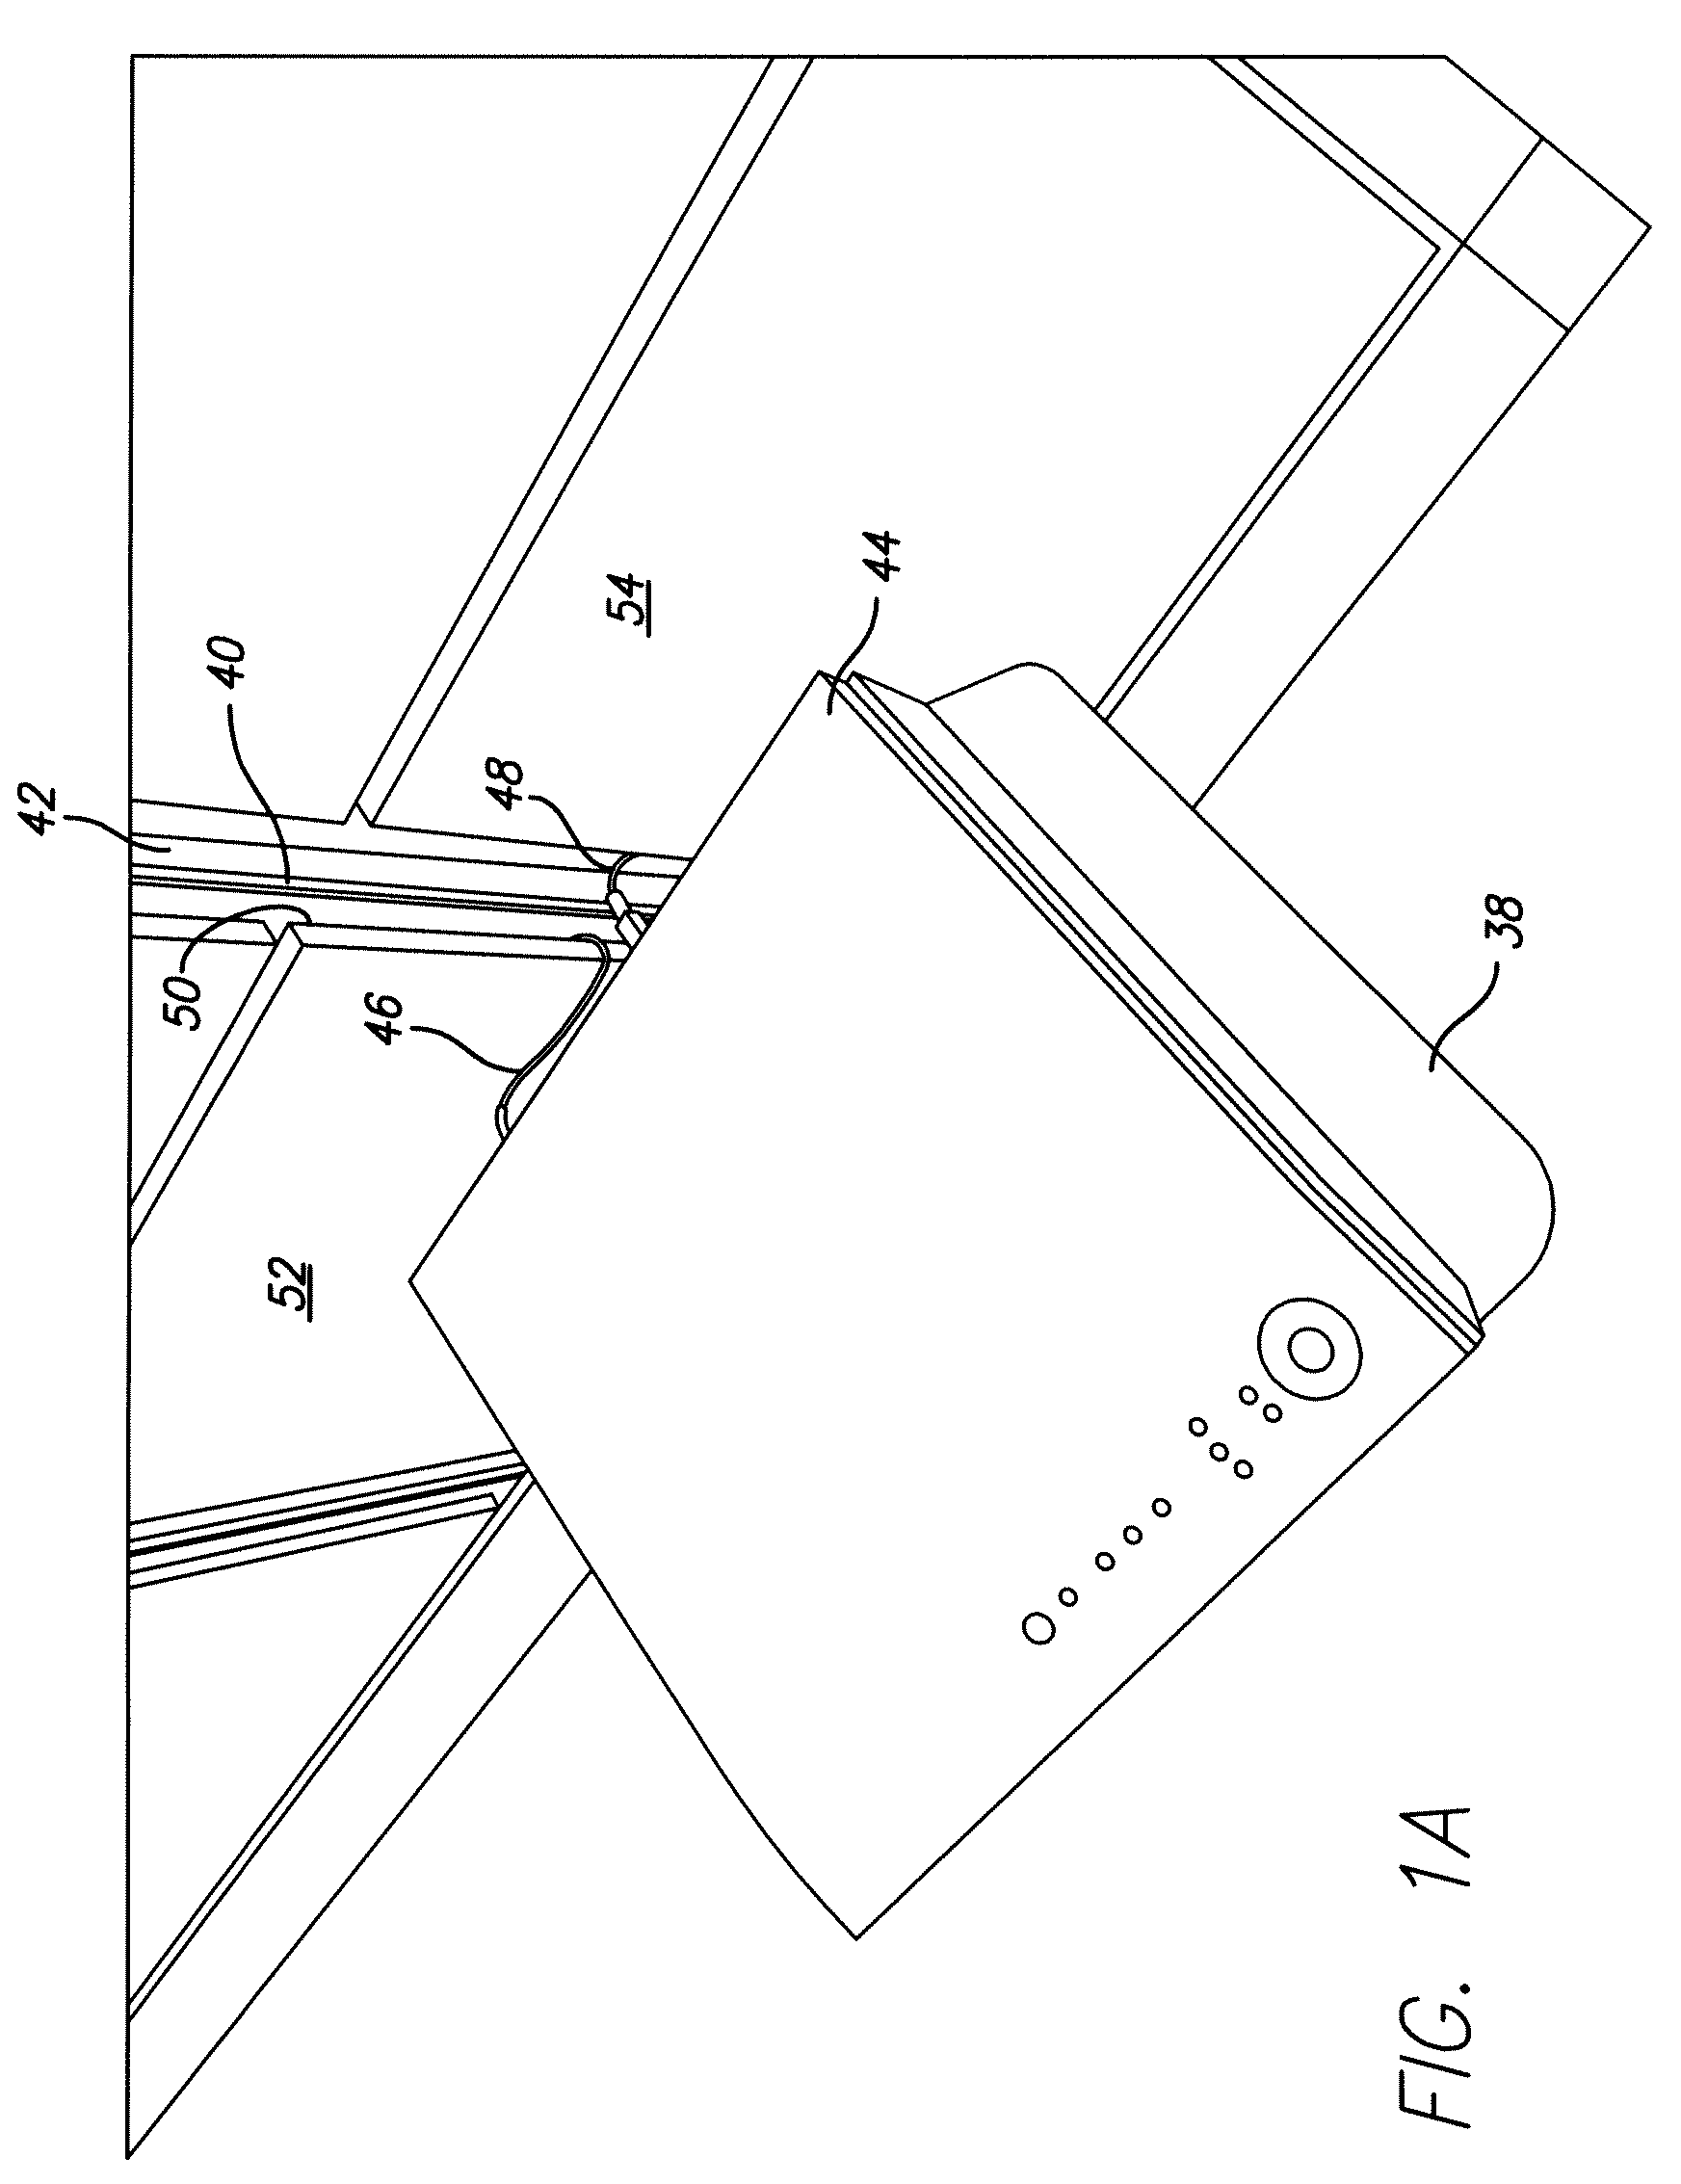 Wall mountable frame structure for mounting equipment